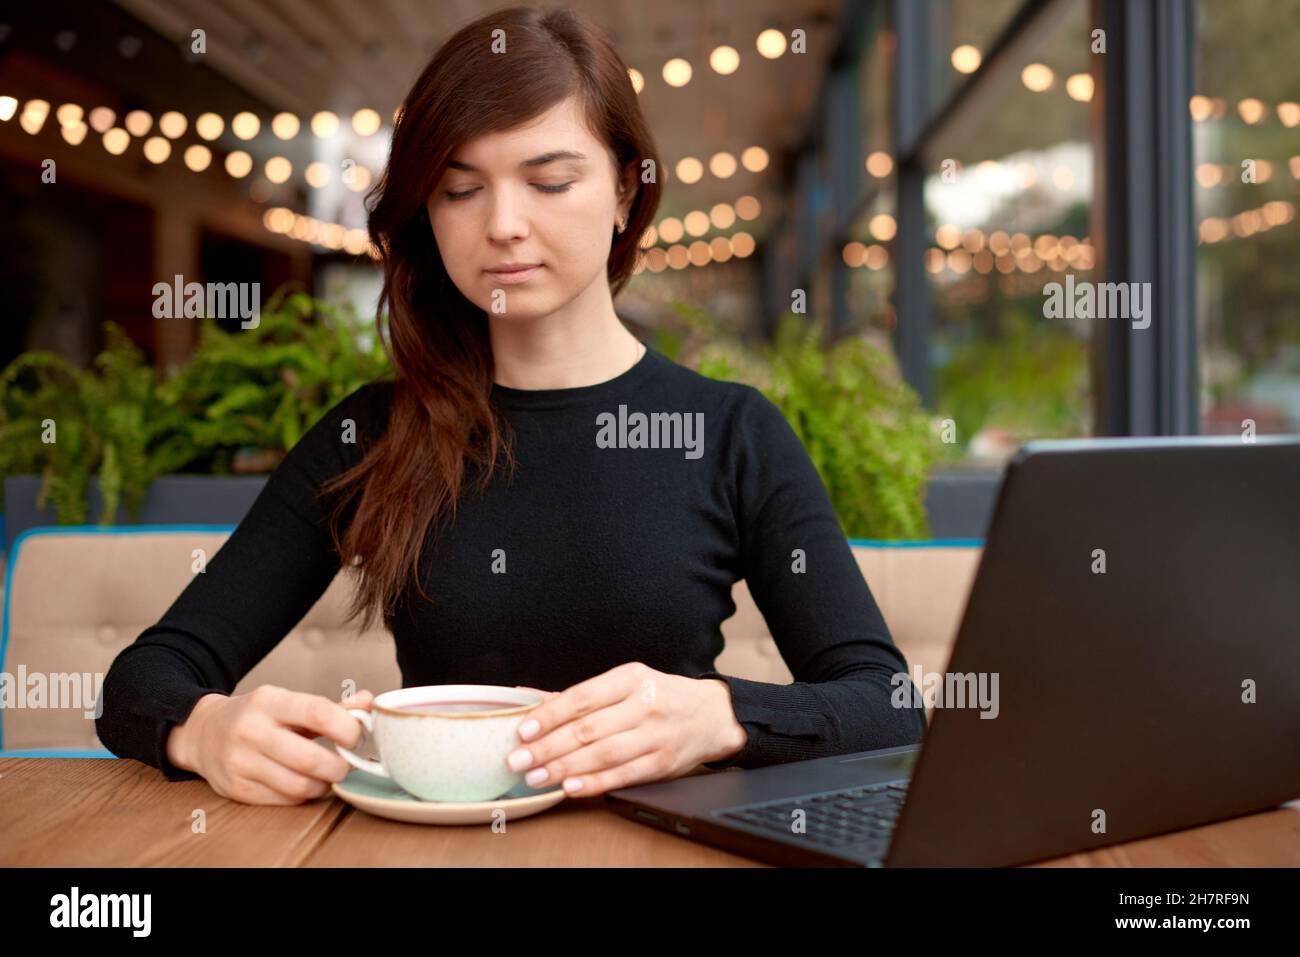 buy nothing day concept. woman use laptop and drink tea in cafe Stock Photo